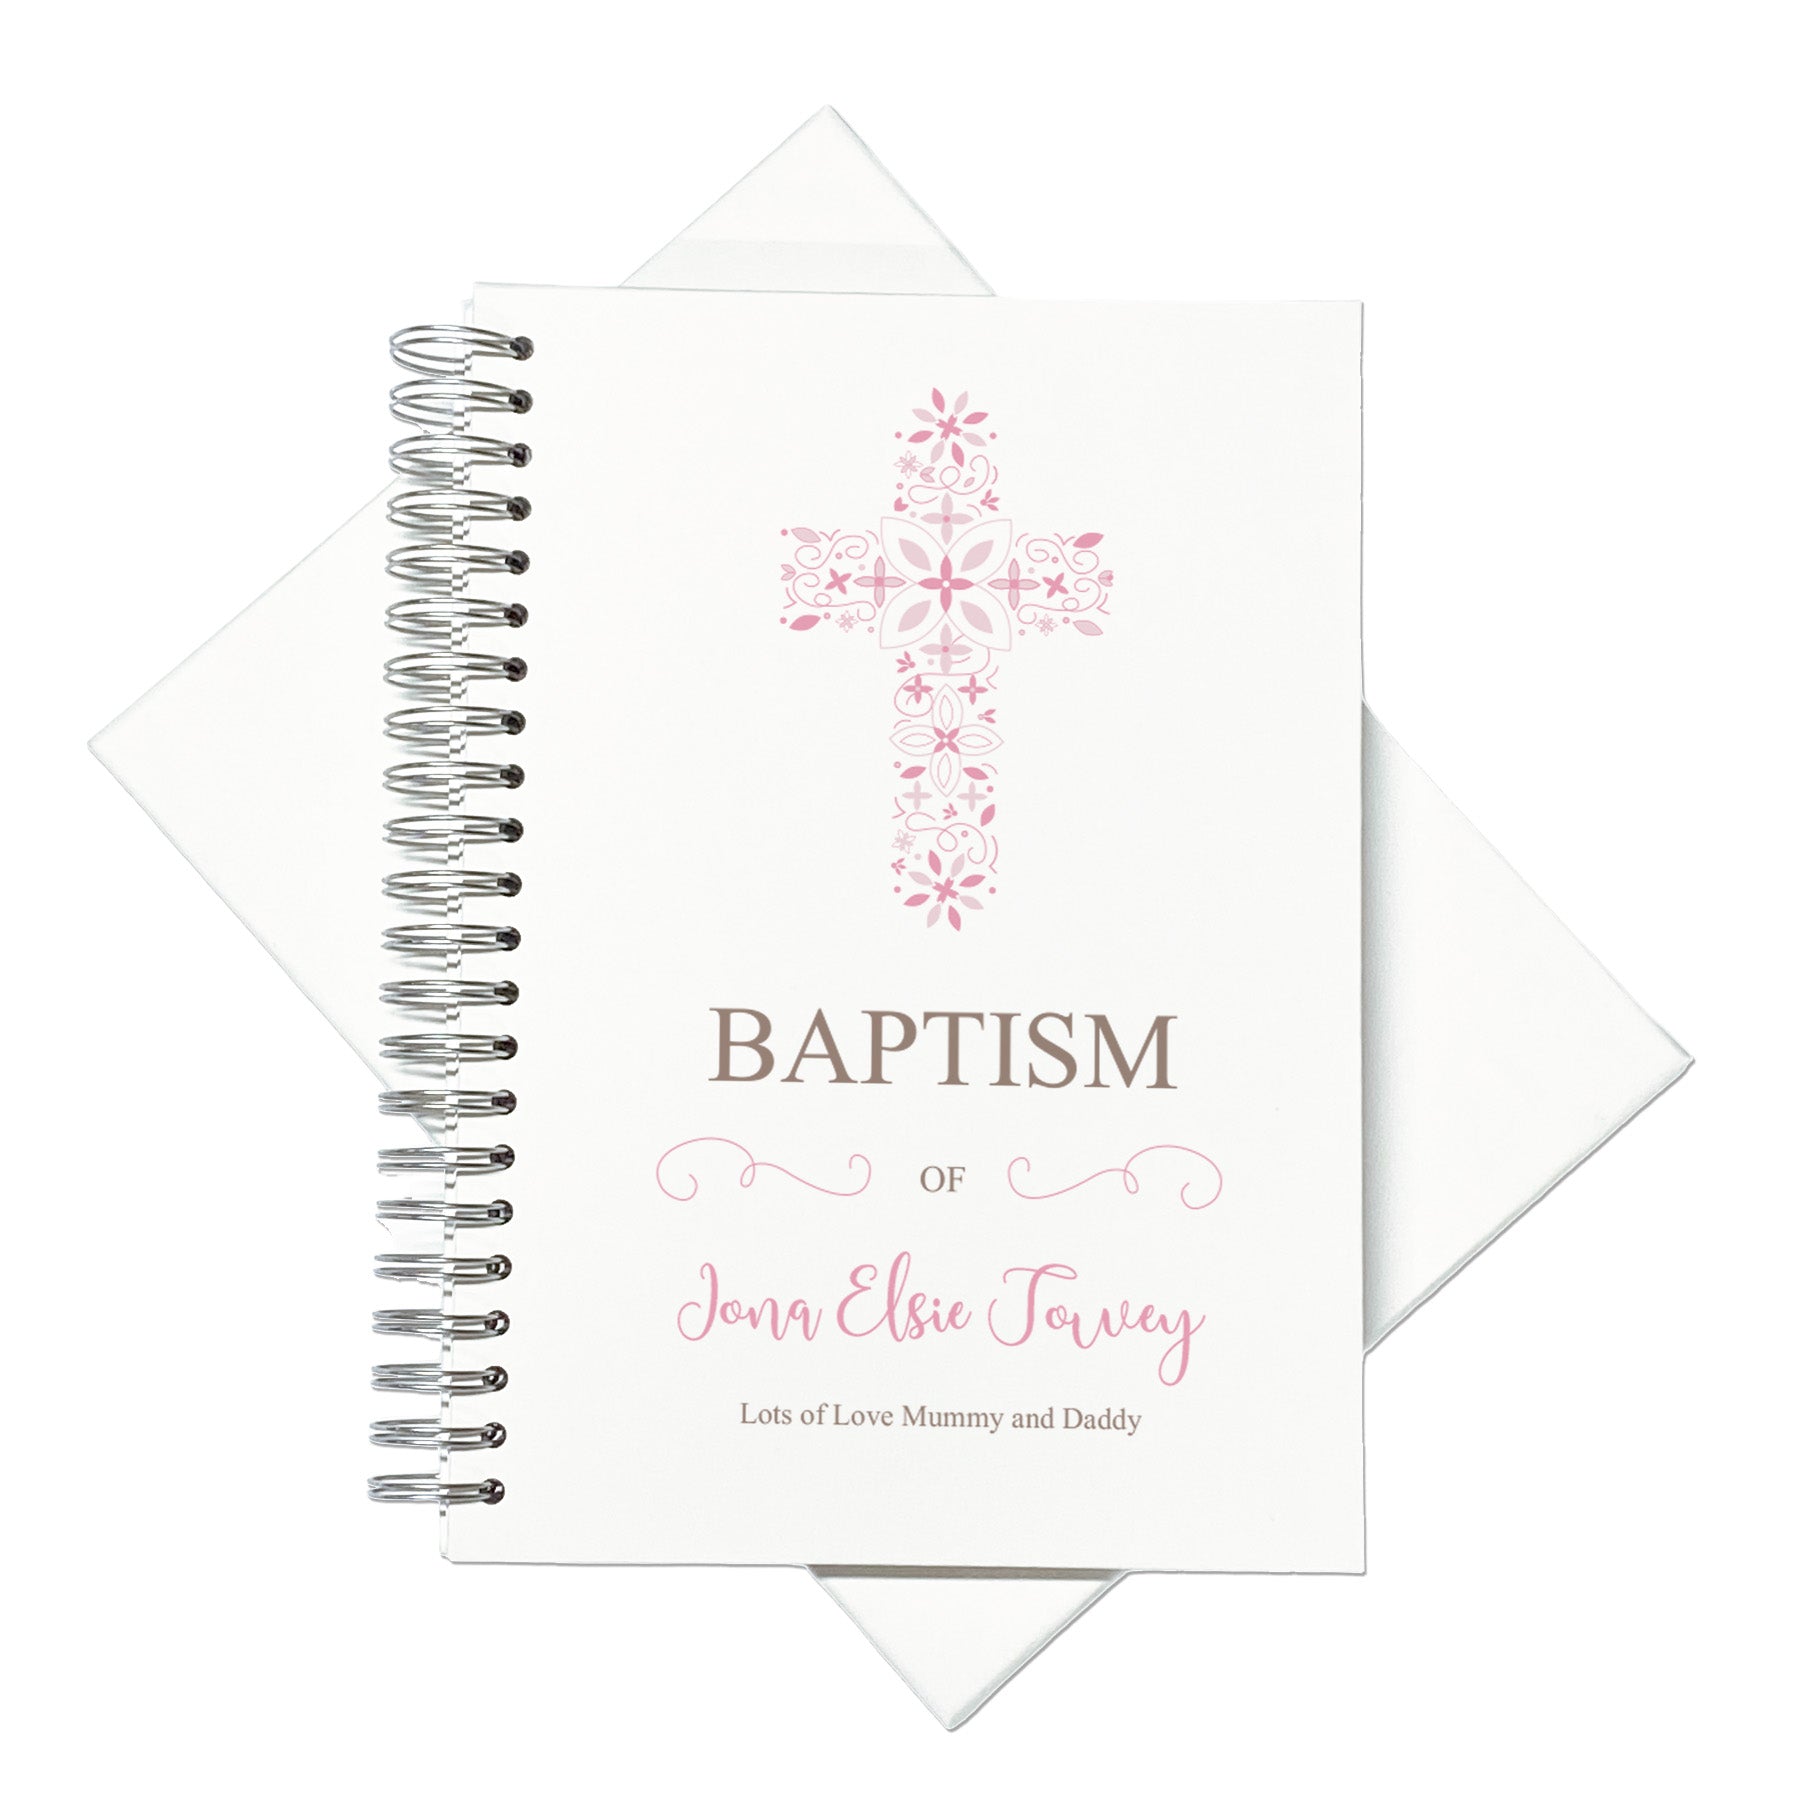 Large Baptism Photo Album Scrapbook Guest Book Boxed With Pink Cross